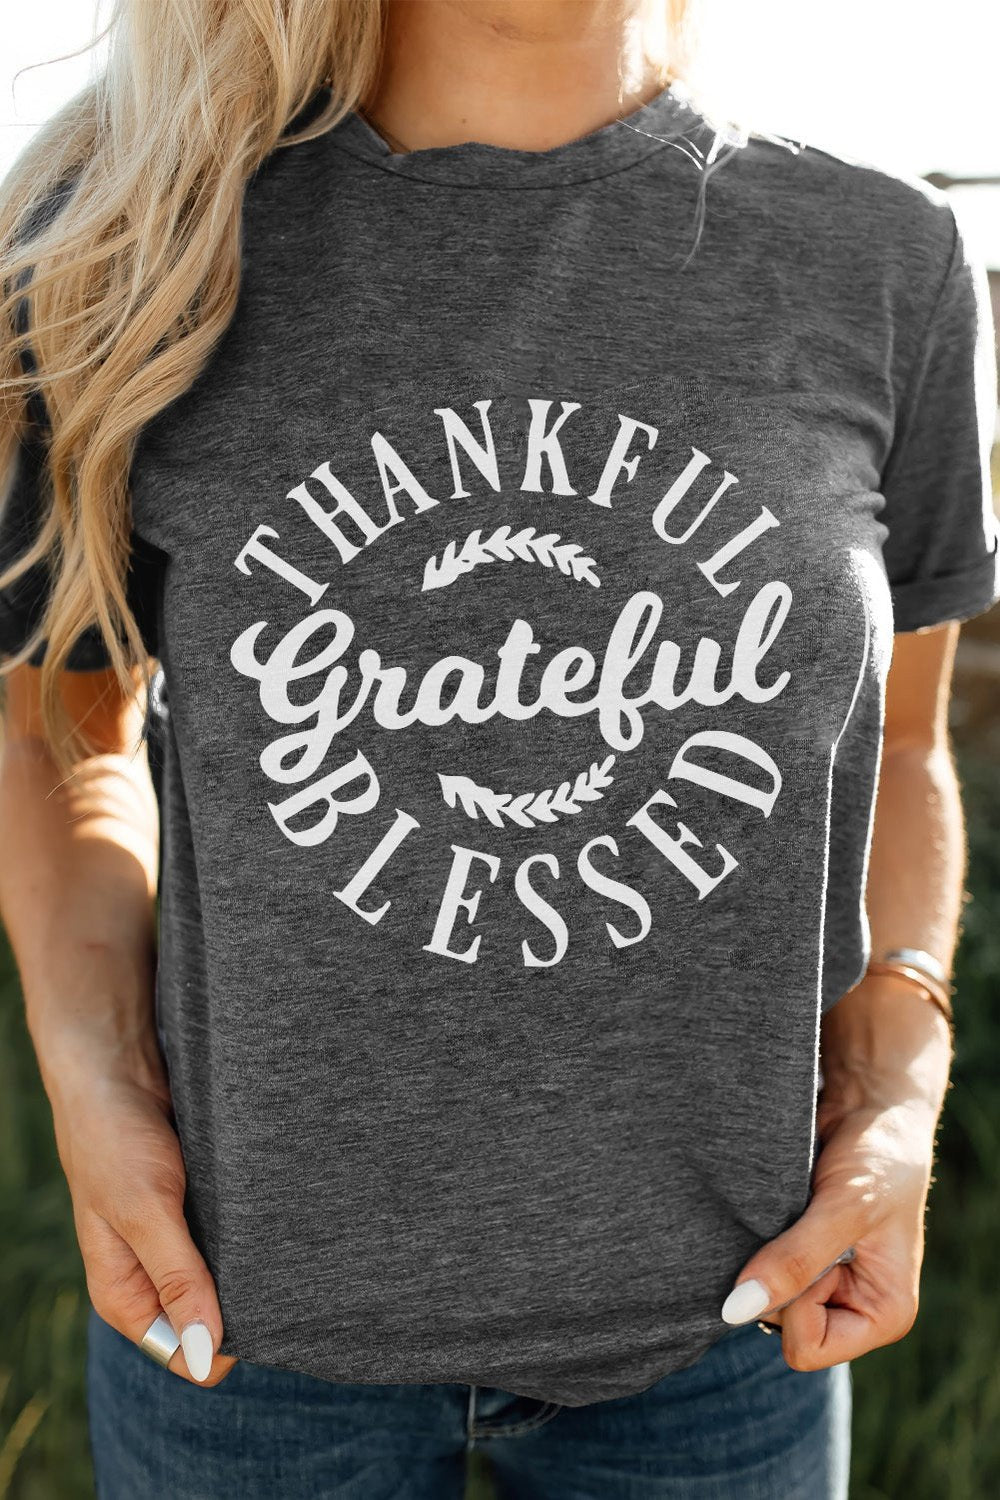 THANKFUL GRATEFUL BLESSED Graphic Crewneck Tee - T-Shirts - FITGGINS